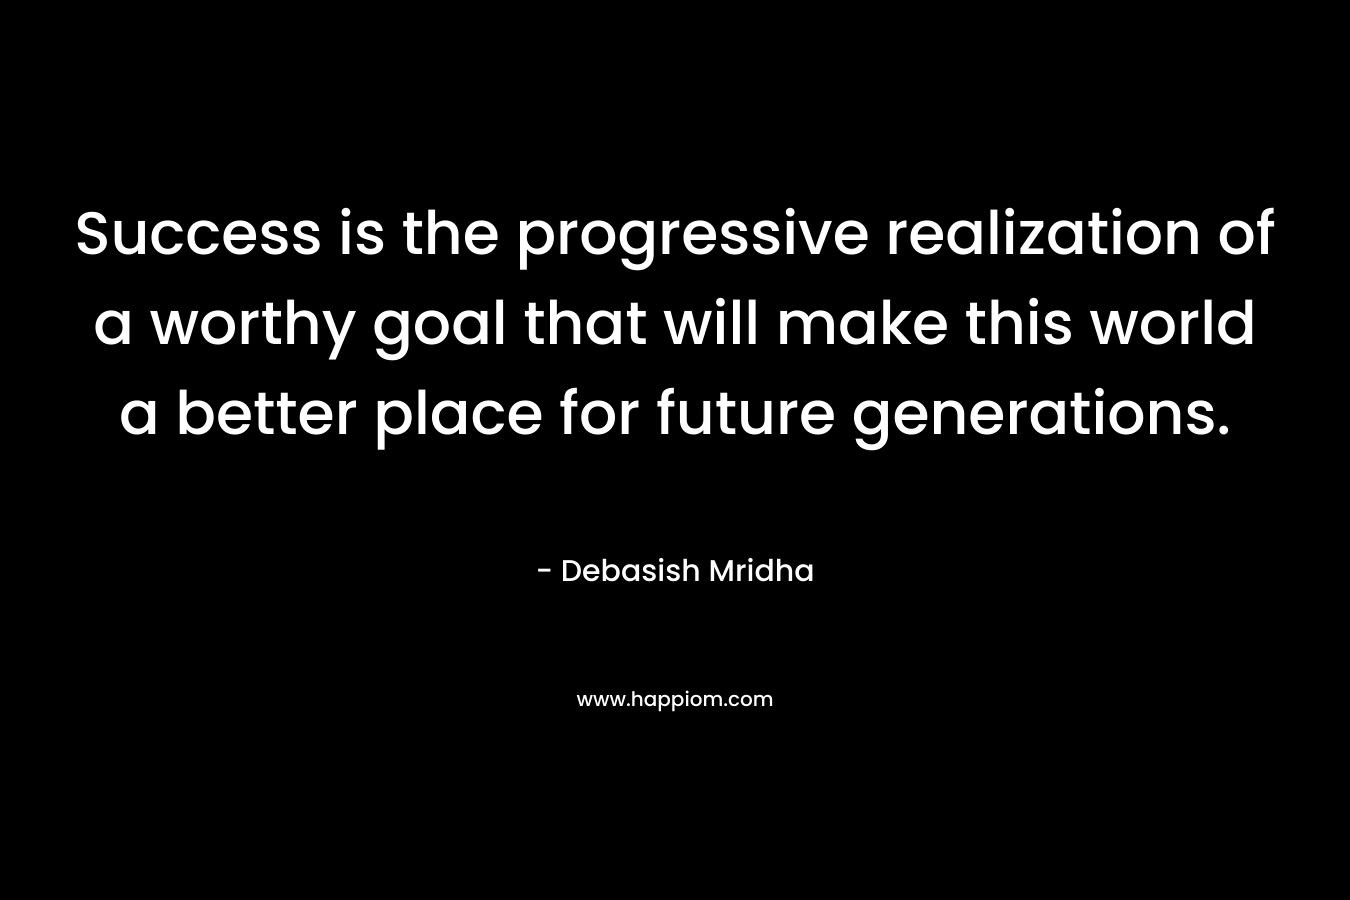 Success is the progressive realization of a worthy goal that will make this world a better place for future generations.